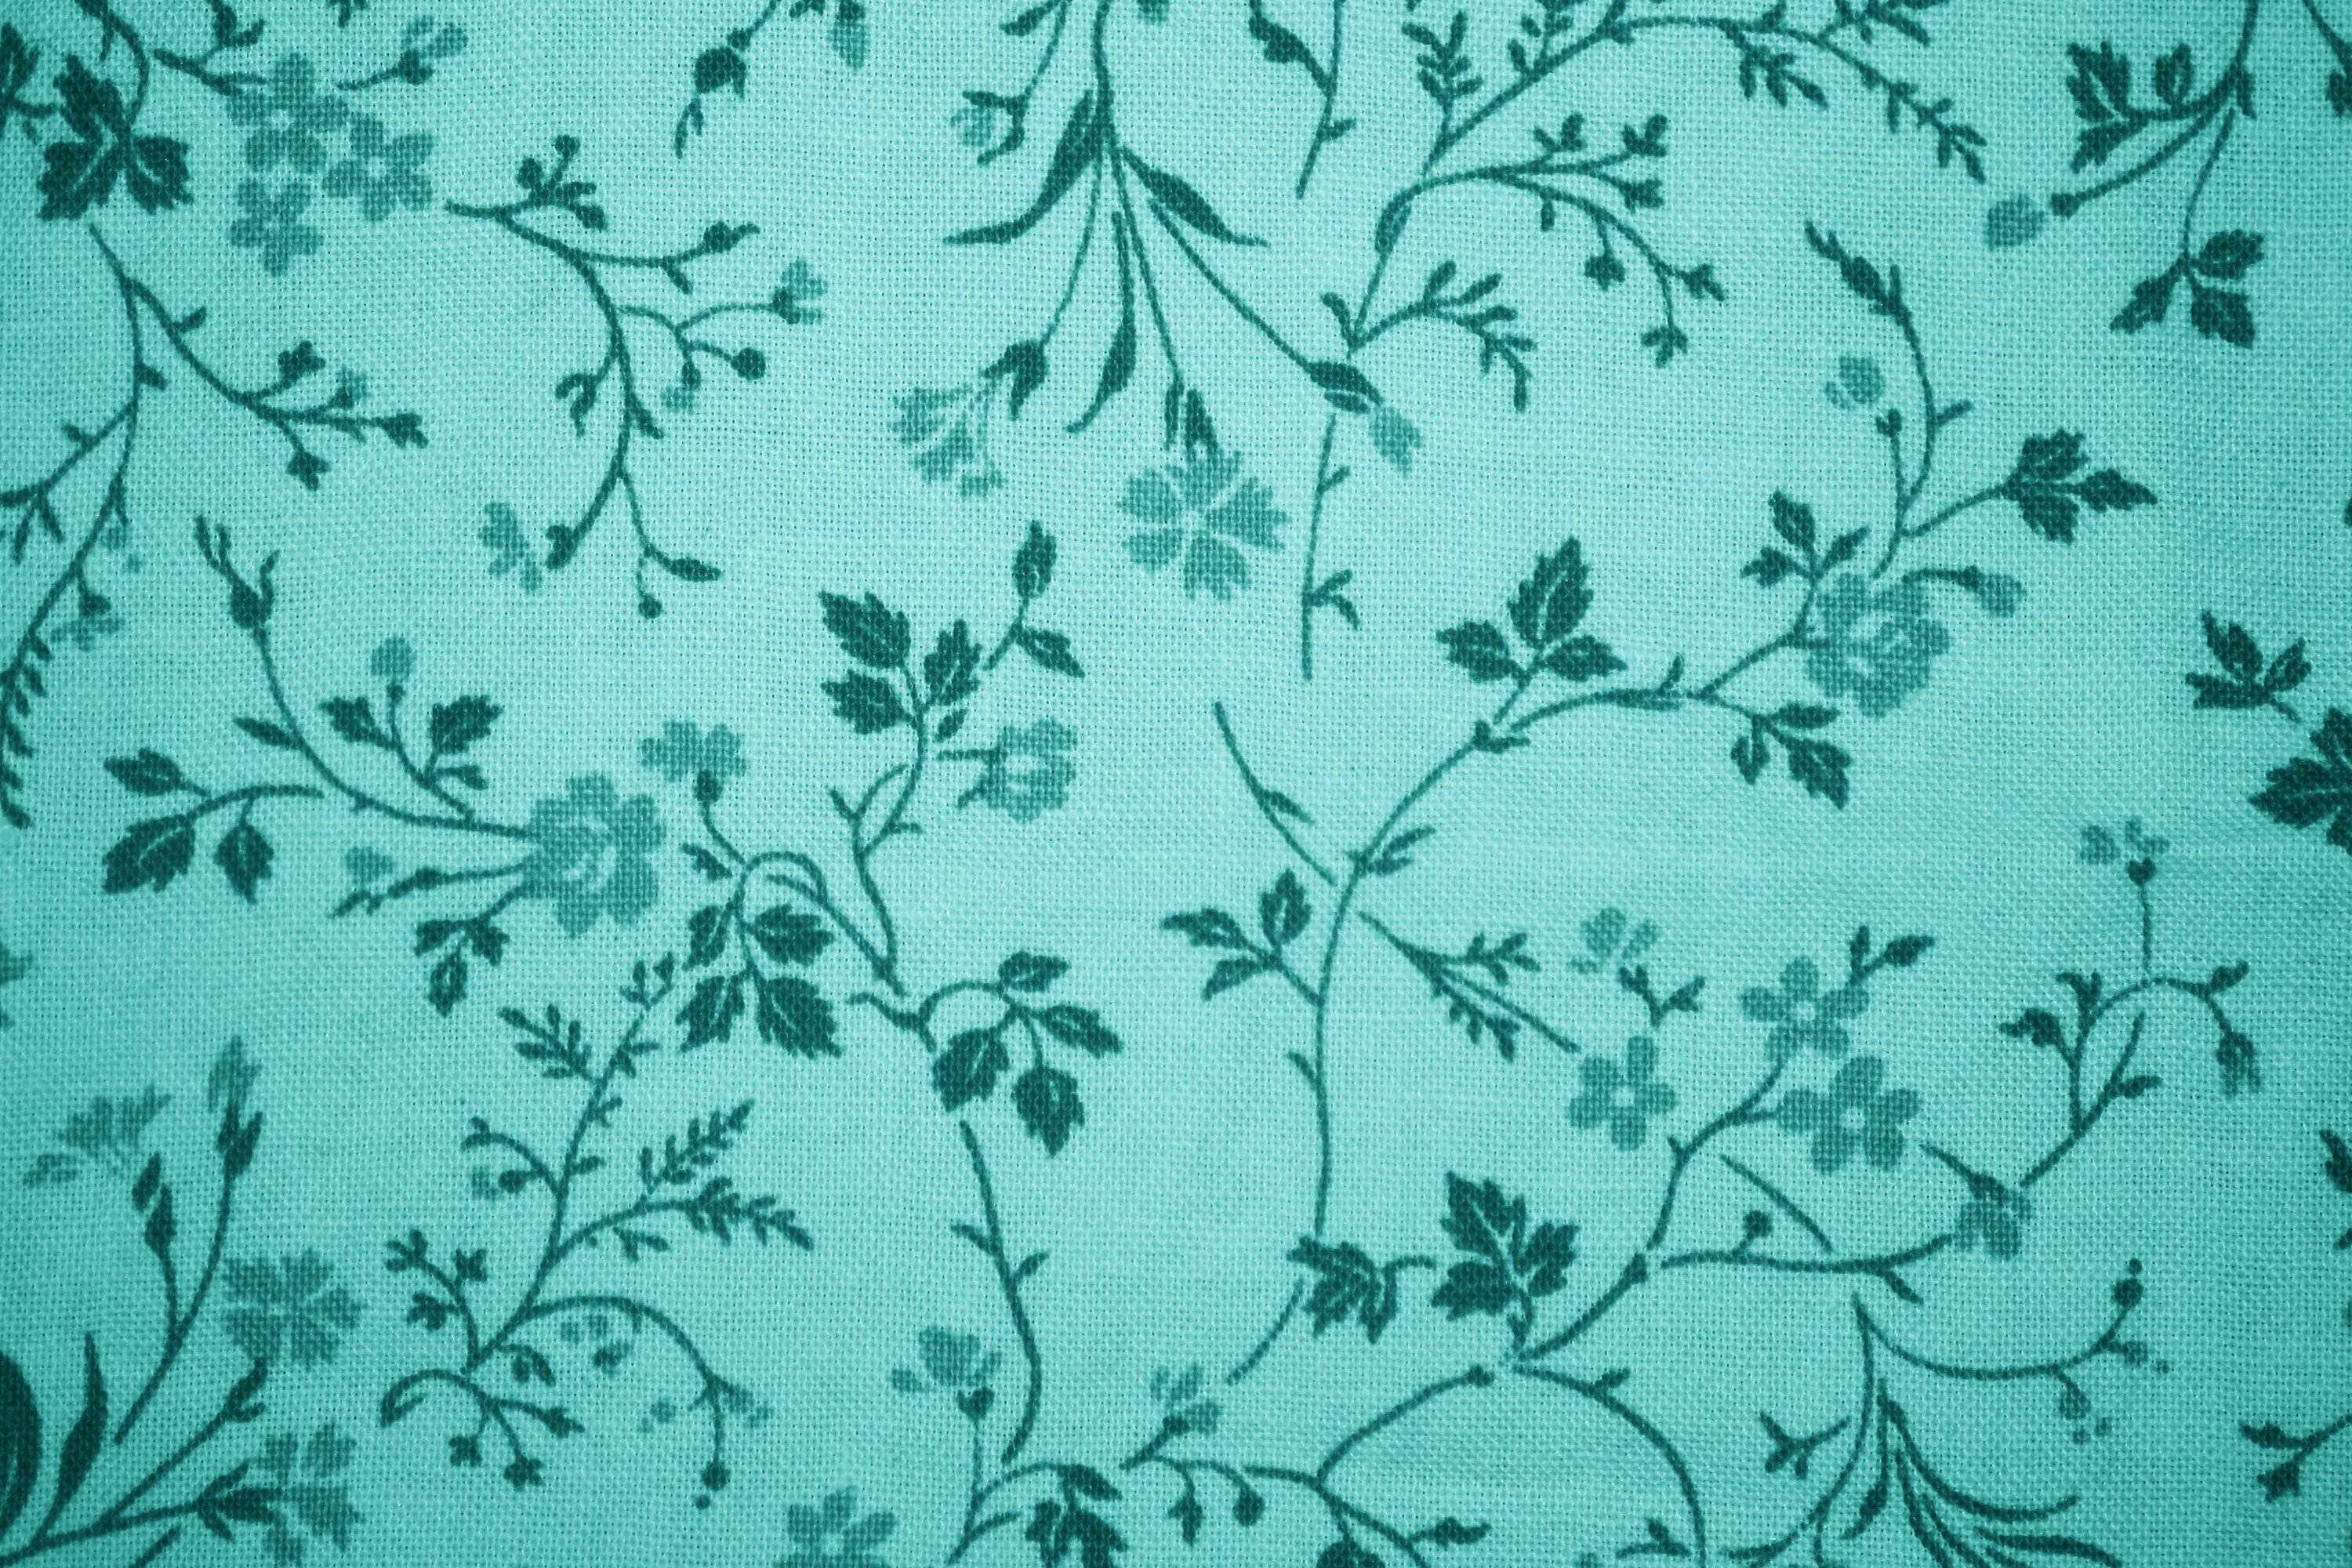 Teal Floral Print Fabric Texture Picture Photograph Photos